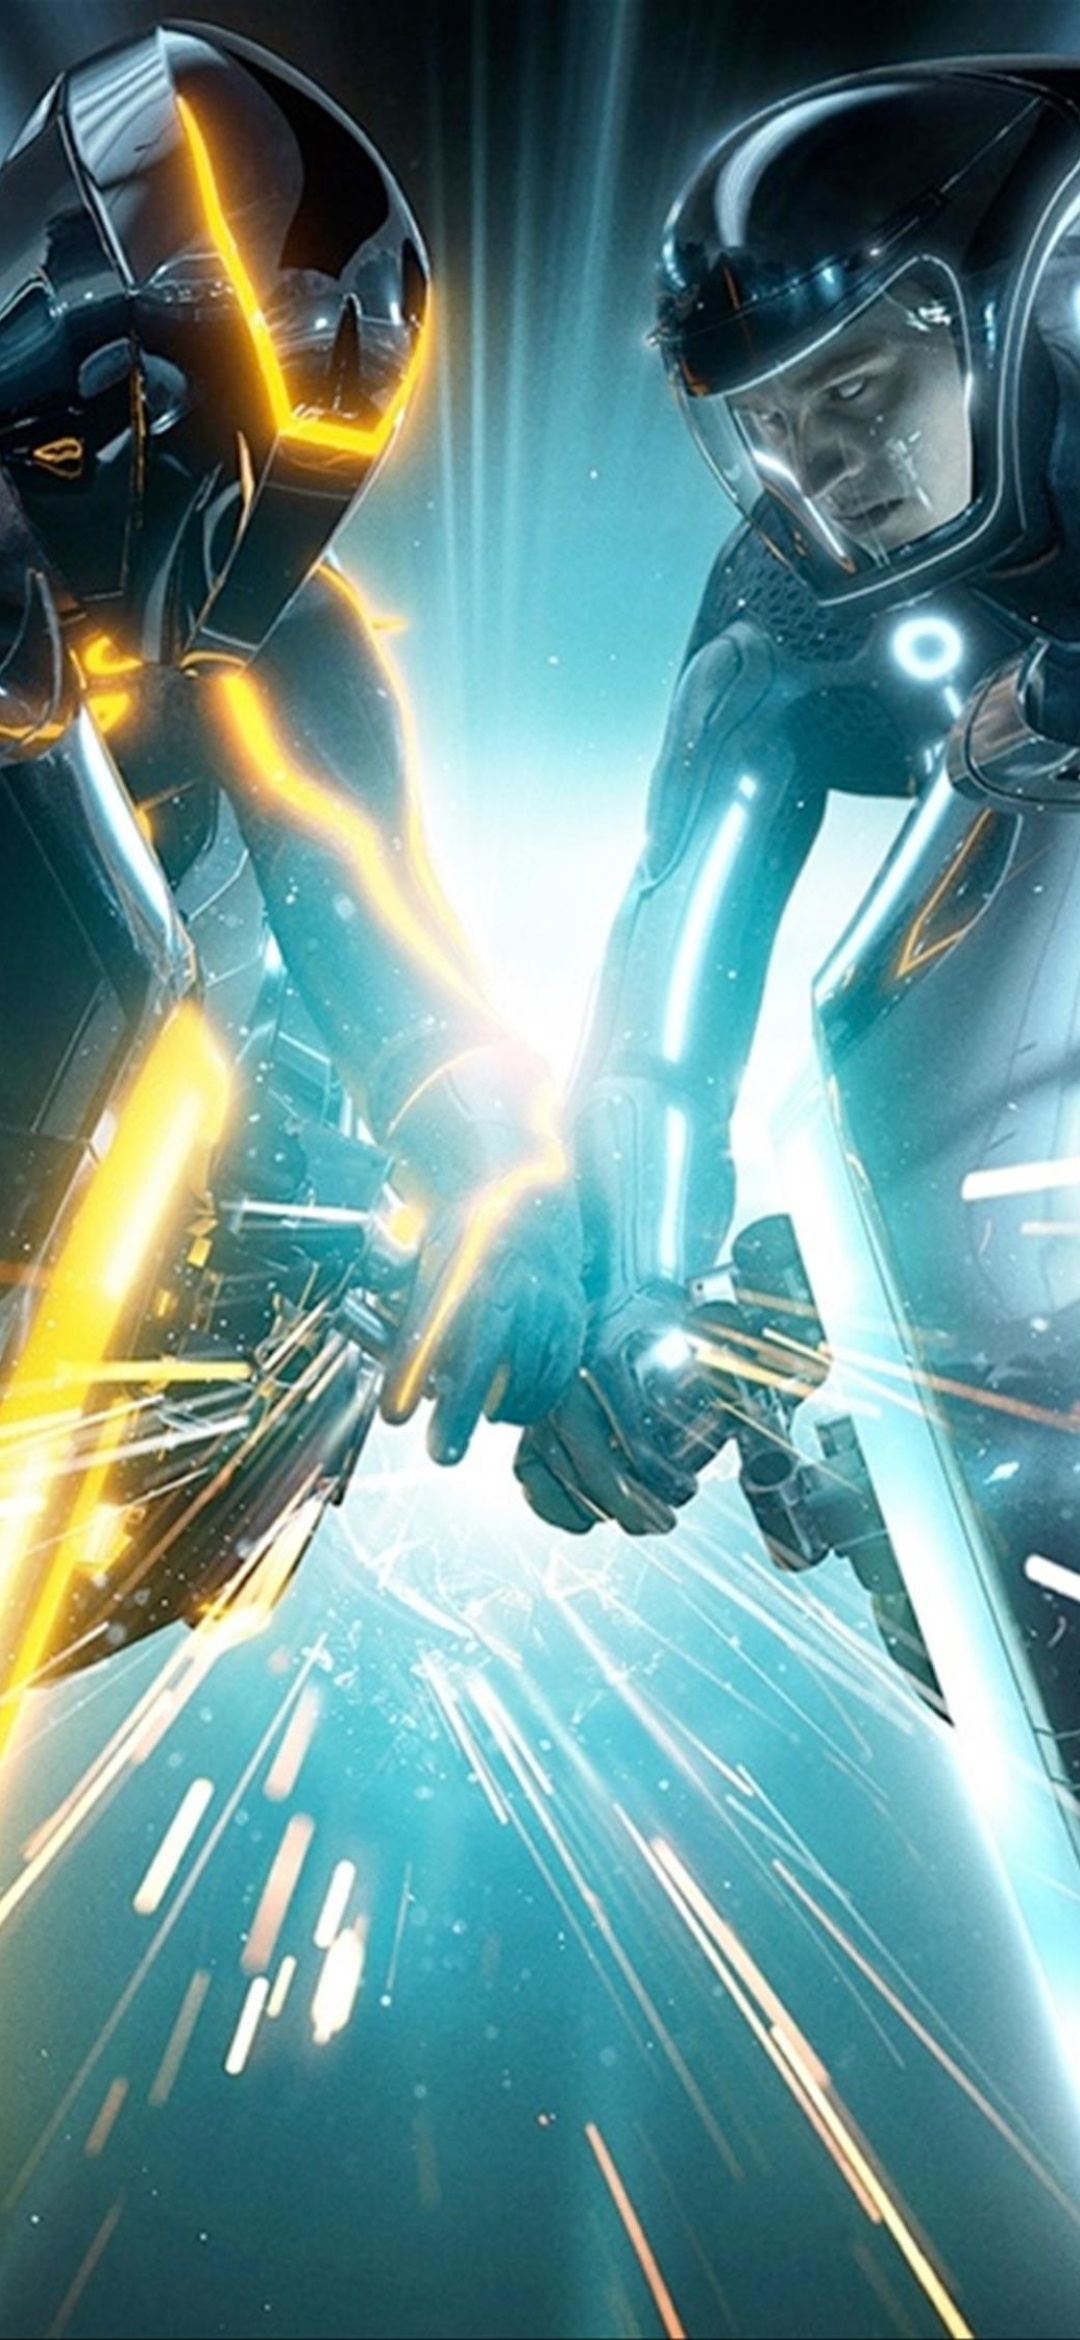 Tron (Movie): Legacy, The wardrobe budget for the film was $13 million. 1080x2340 HD Wallpaper.